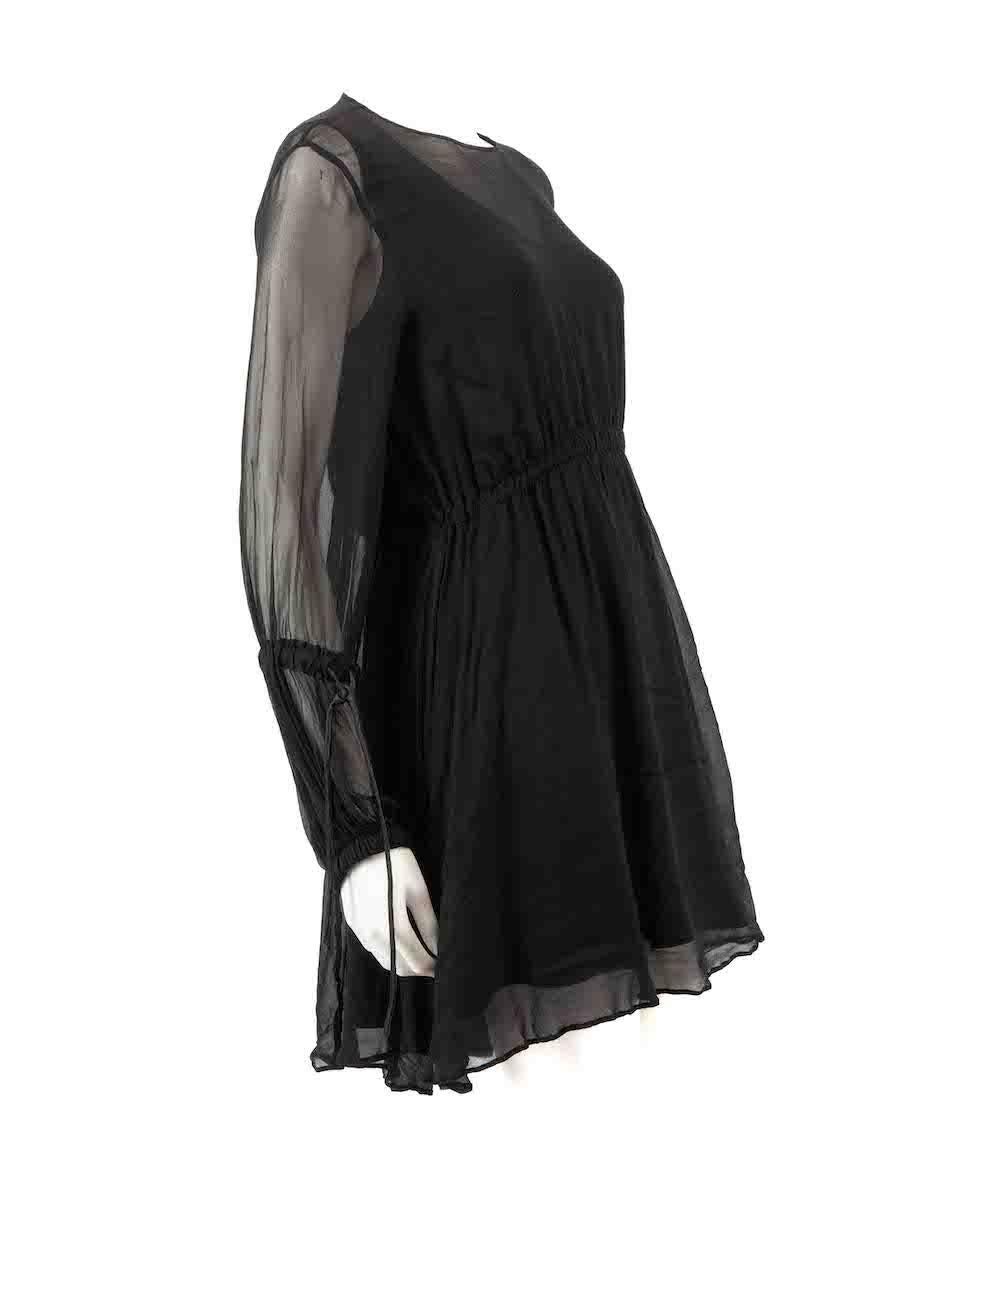 CONDITION is Very good. Minimal wear to dress is evident. Minimal wear to the rear of skirt with two small holes and the composition label has been removed on this used Sportmax designer resale item.
 
 
 
 Details
 
 
 Black
 
 Silk
 
 Layered